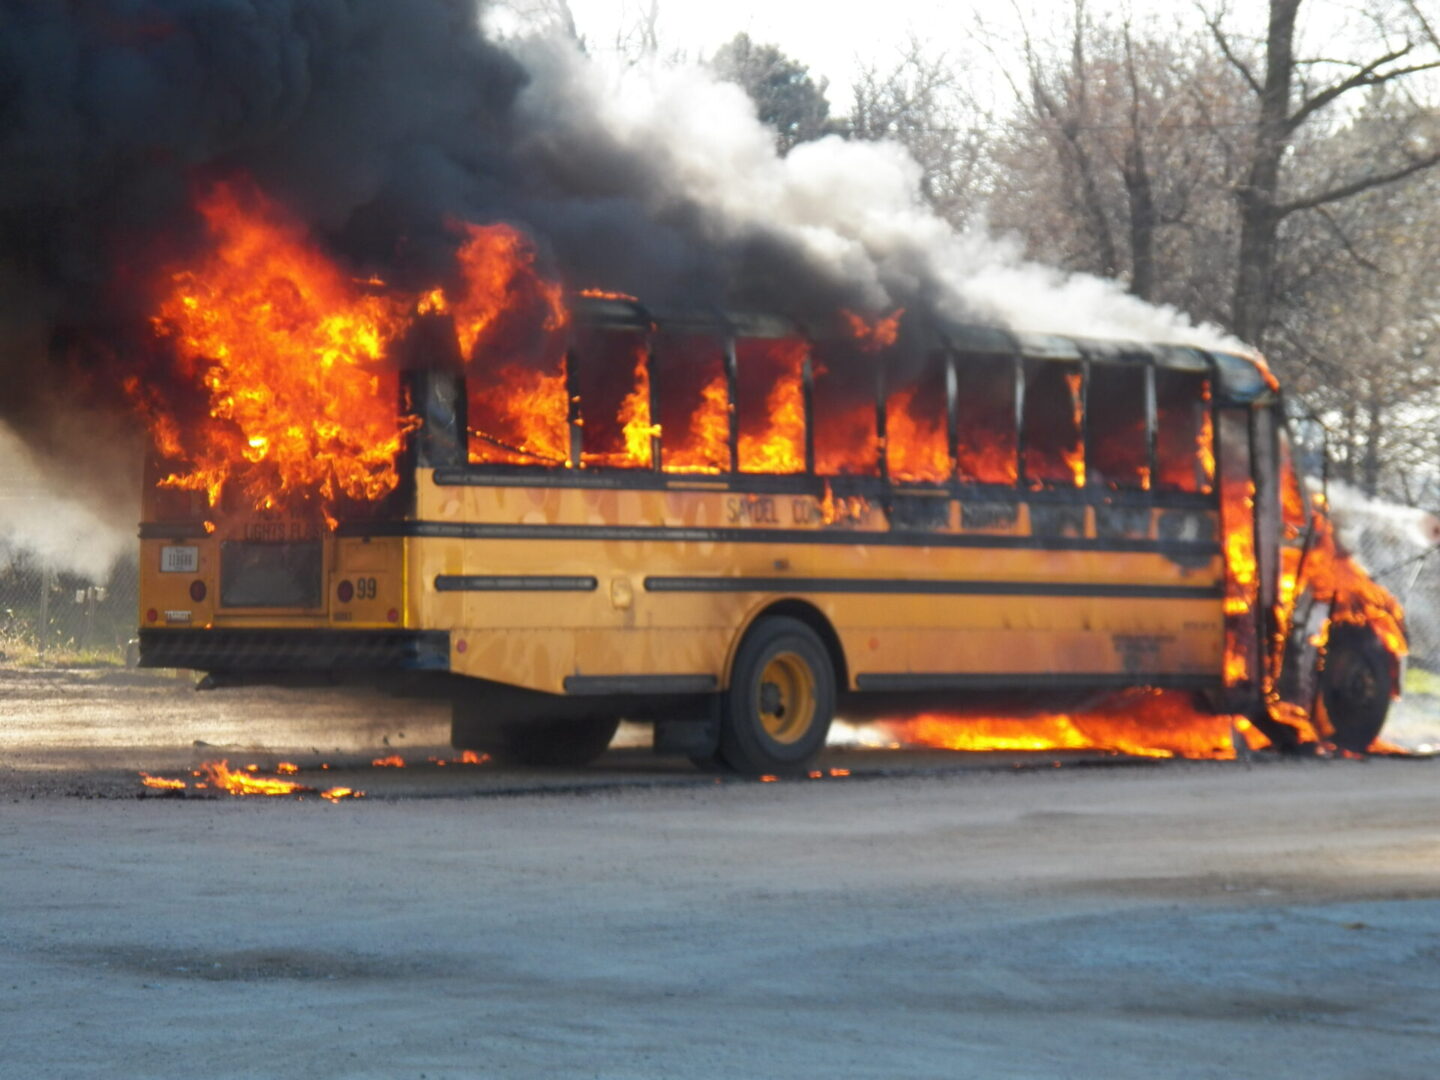 A school bus is burning on the side of the road.